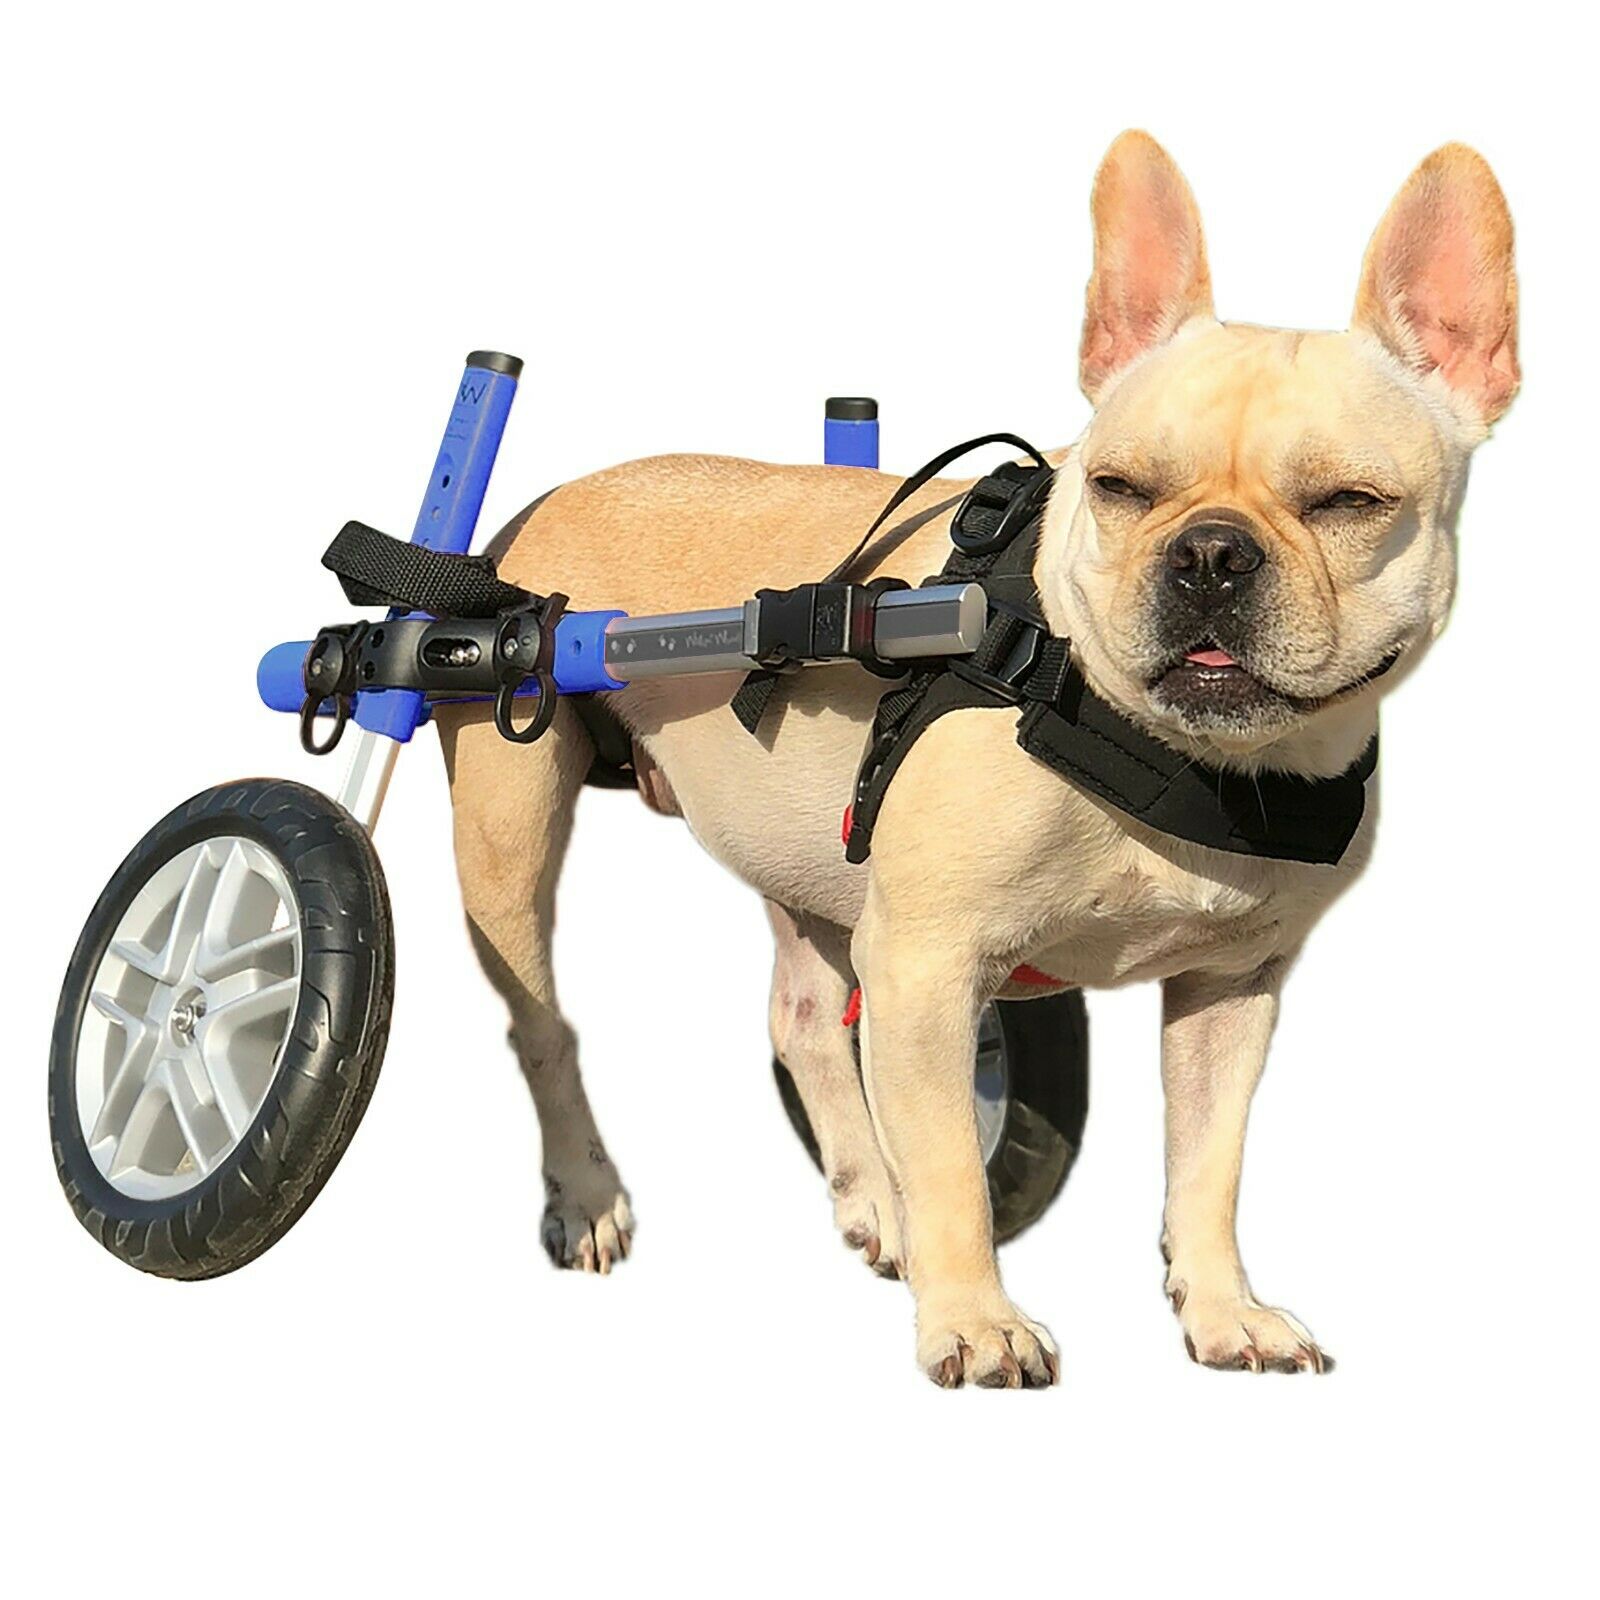 Refurbished Dog Wheelchair For Small Dogs - By Walkin' Wheels